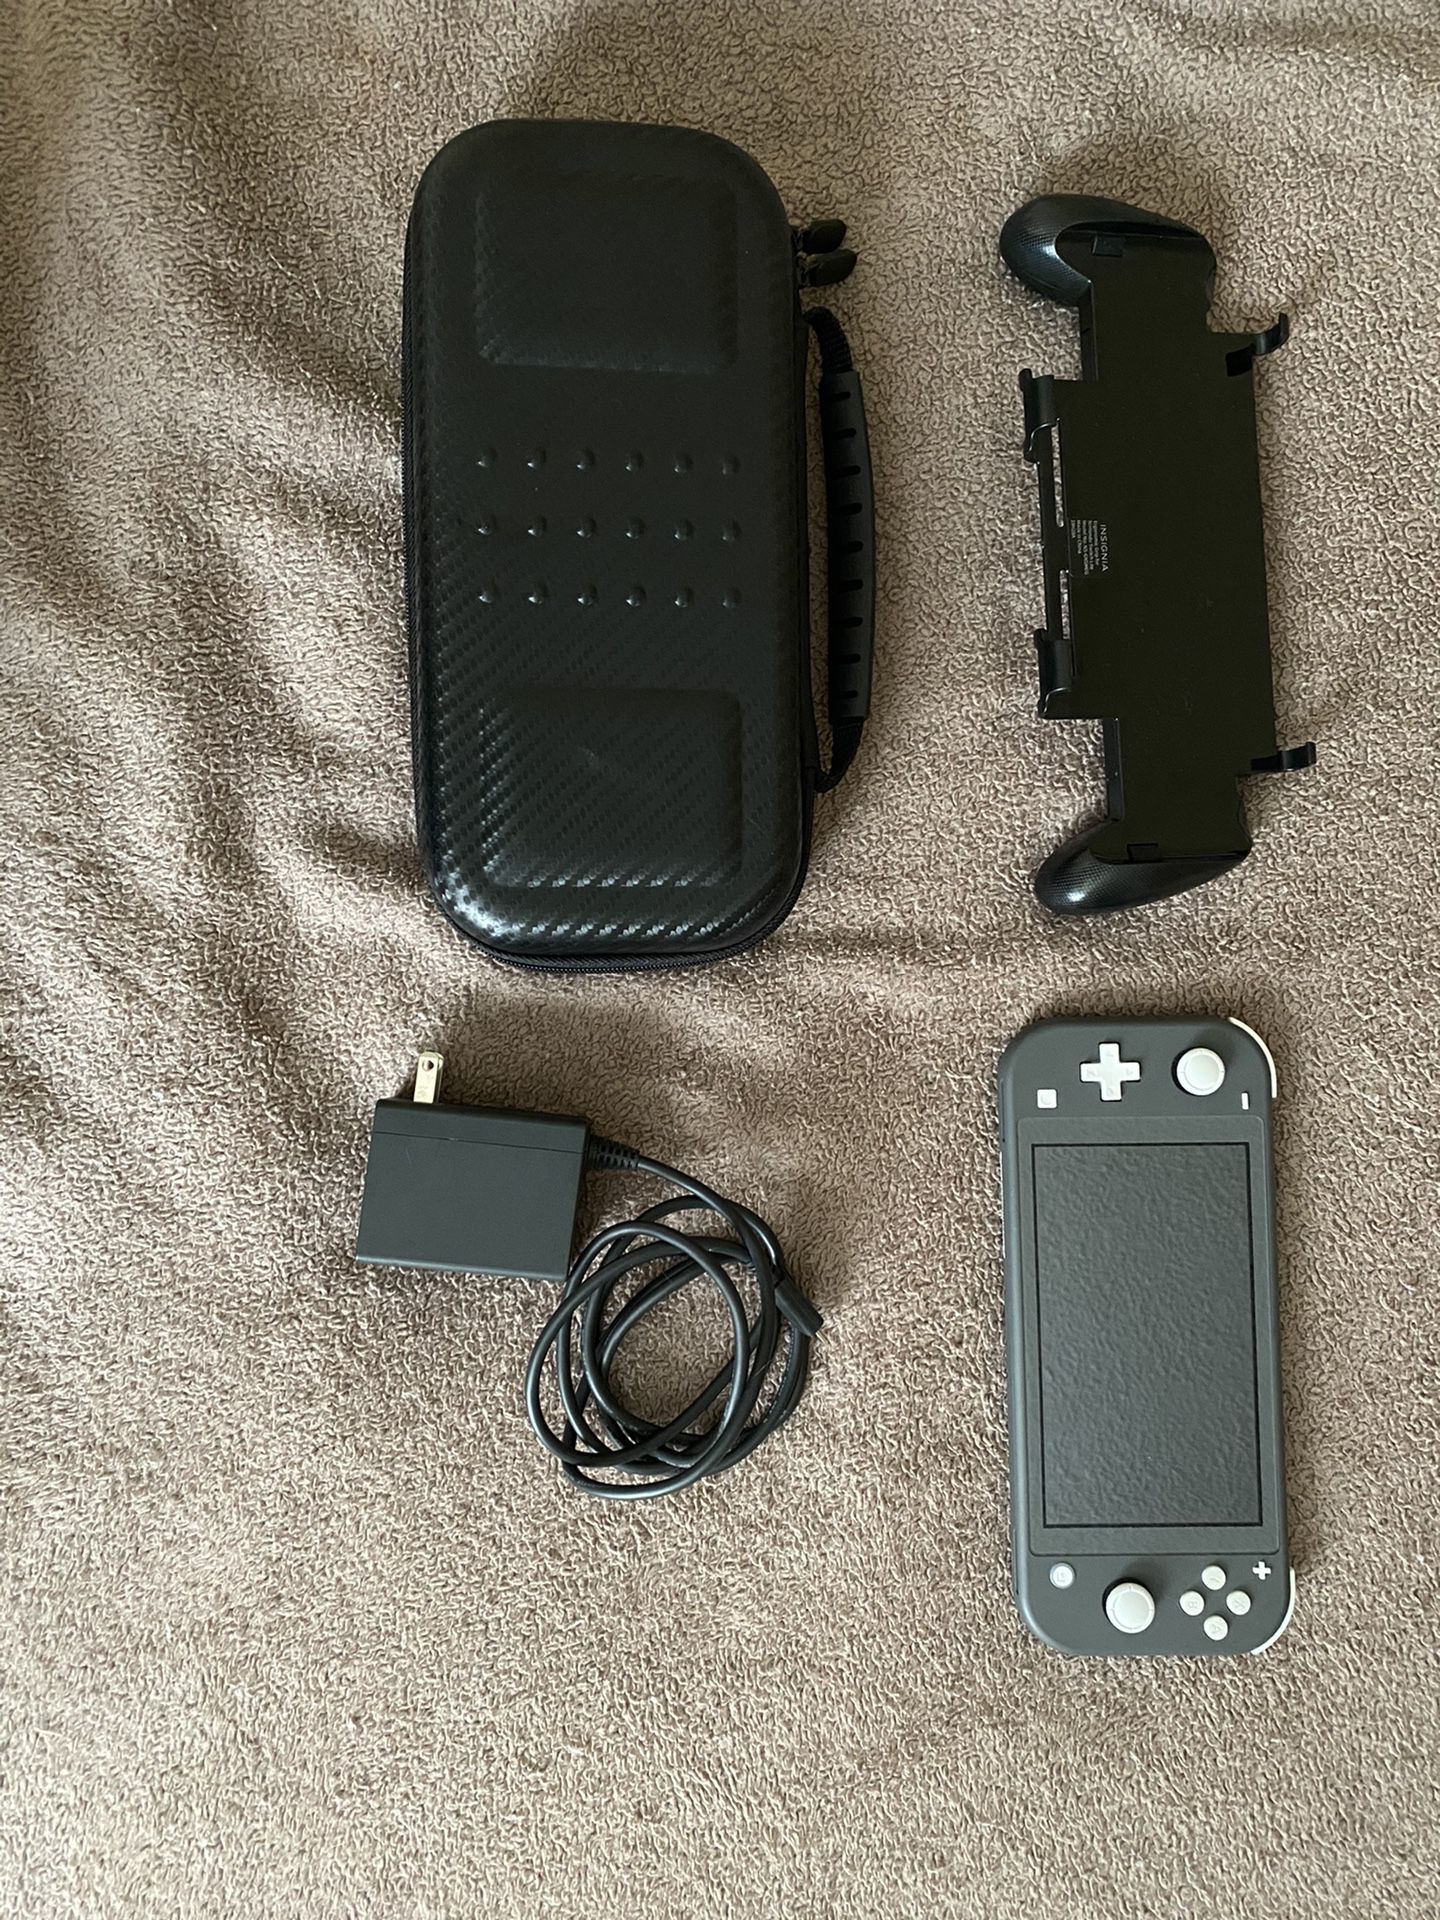 Nintendo Switch w/Games and Accessories